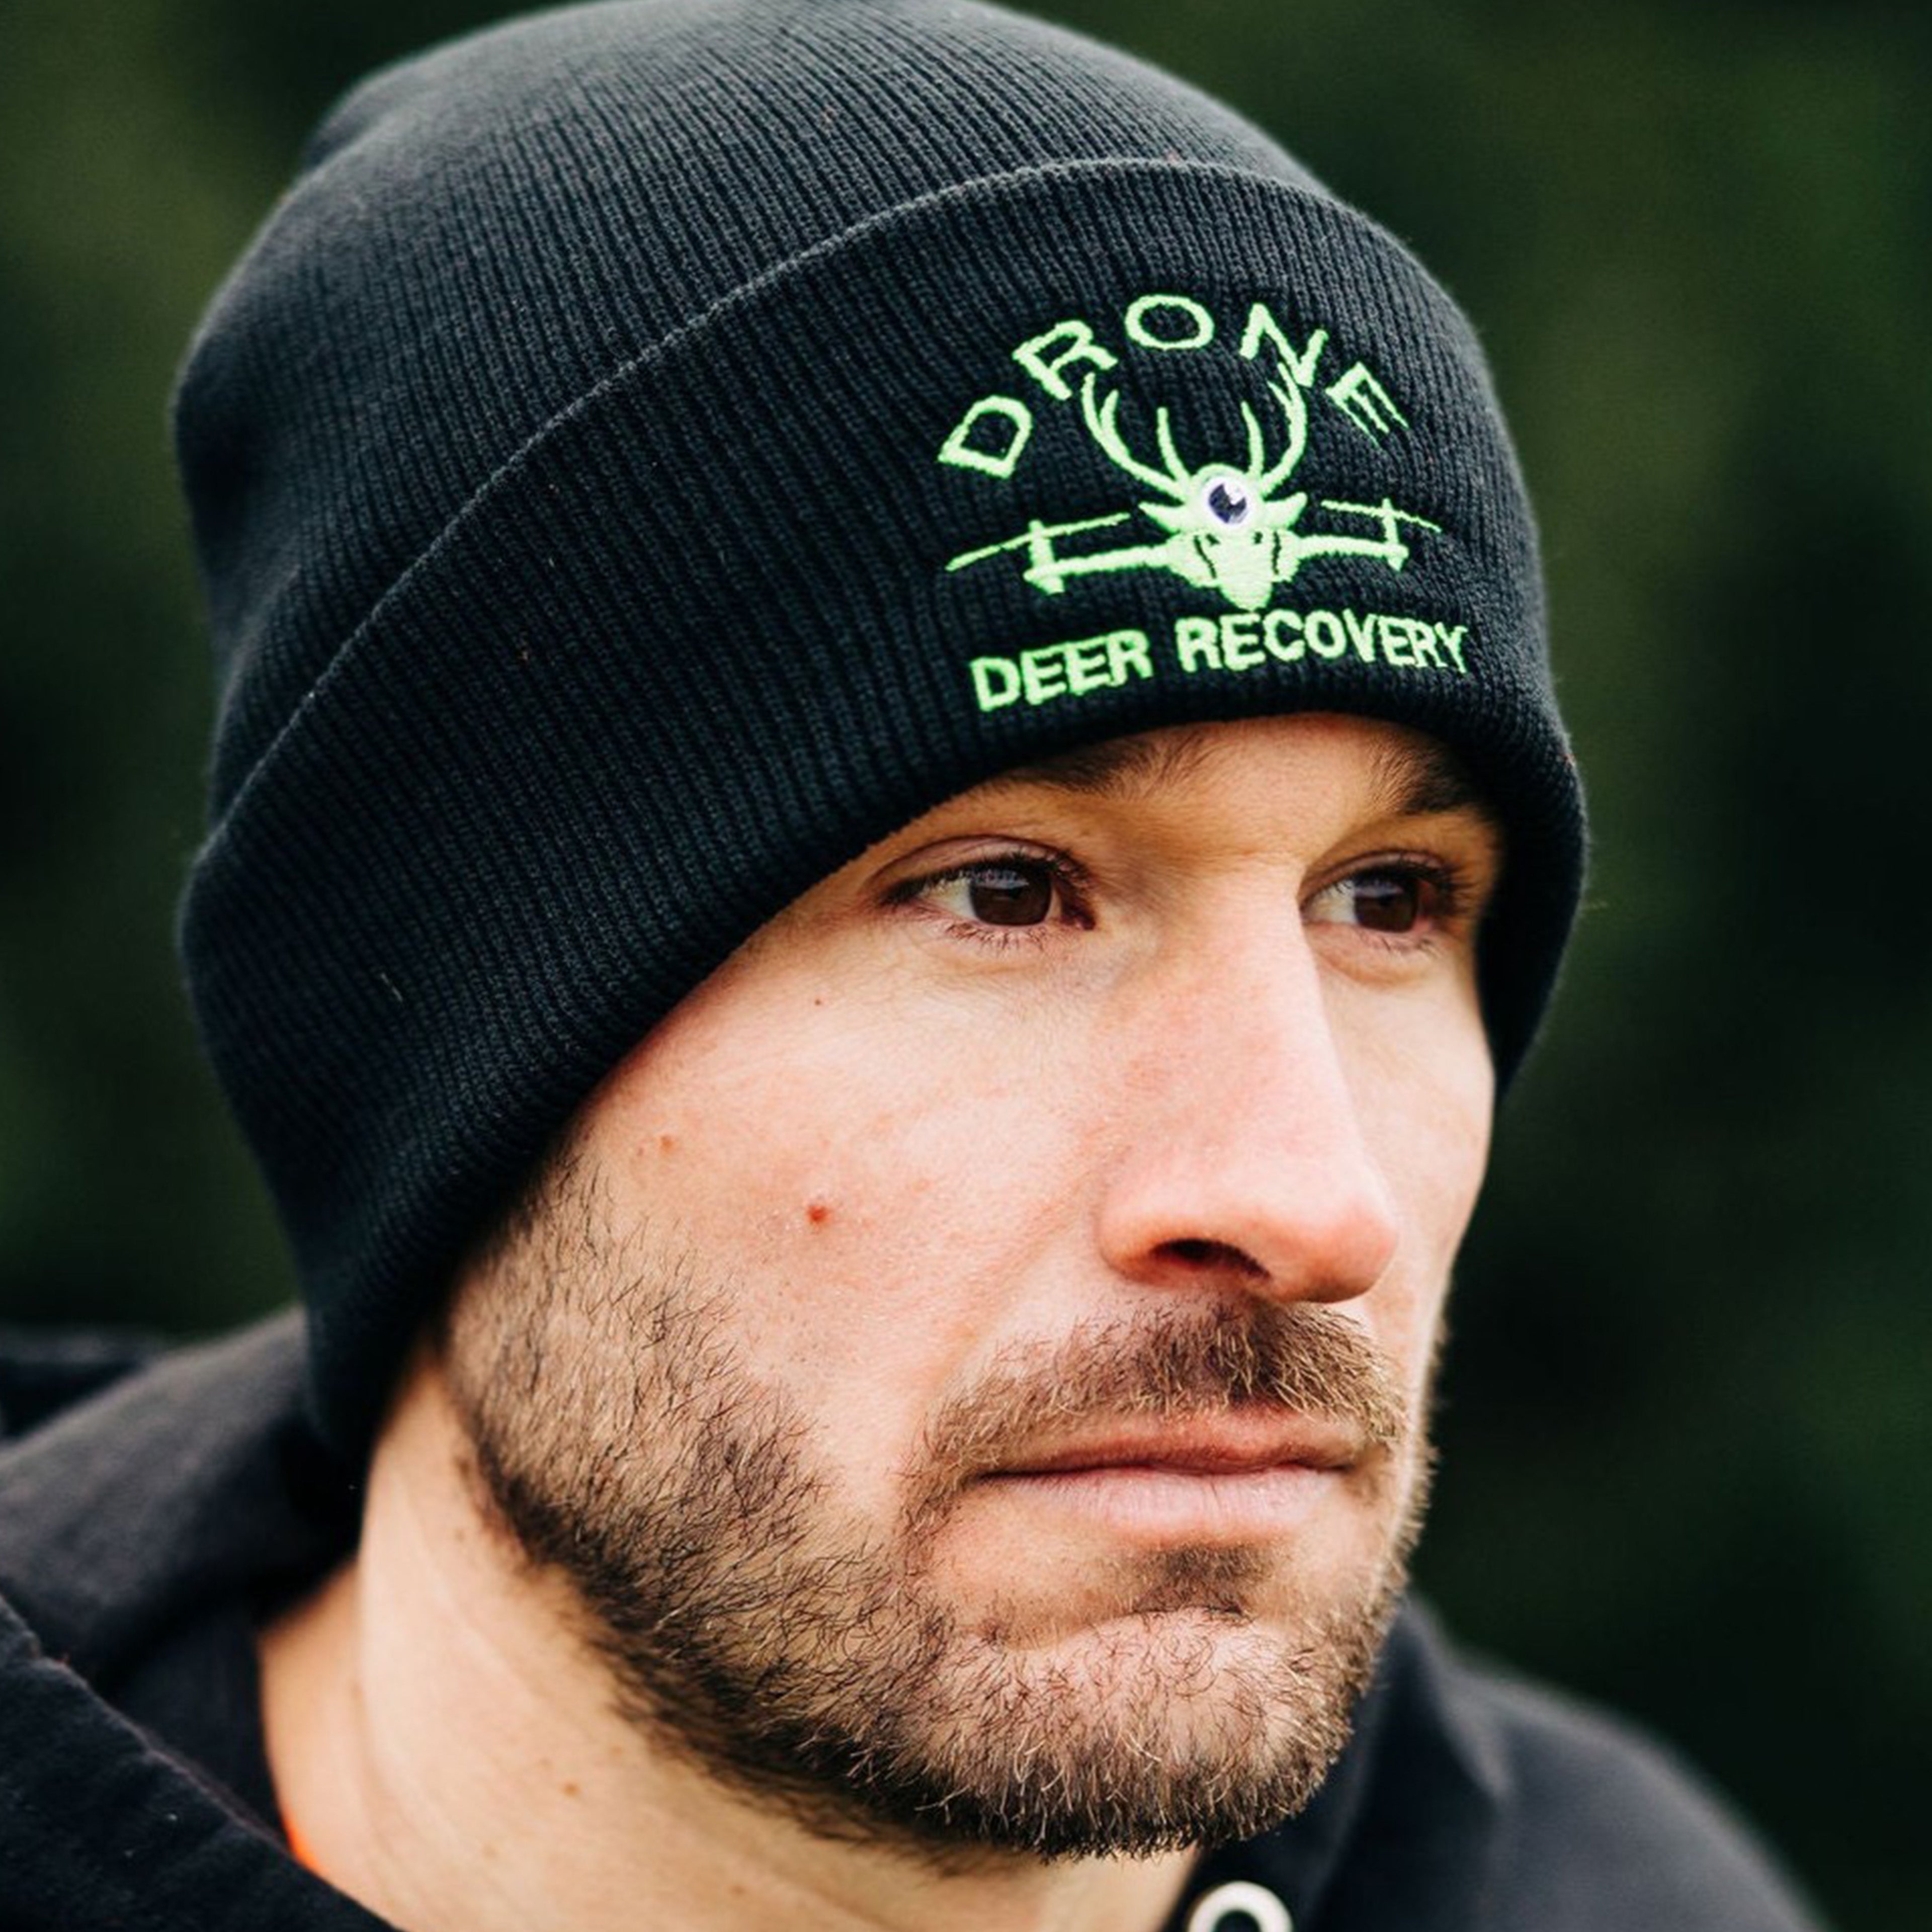 Drone Deer Recovery Beanie